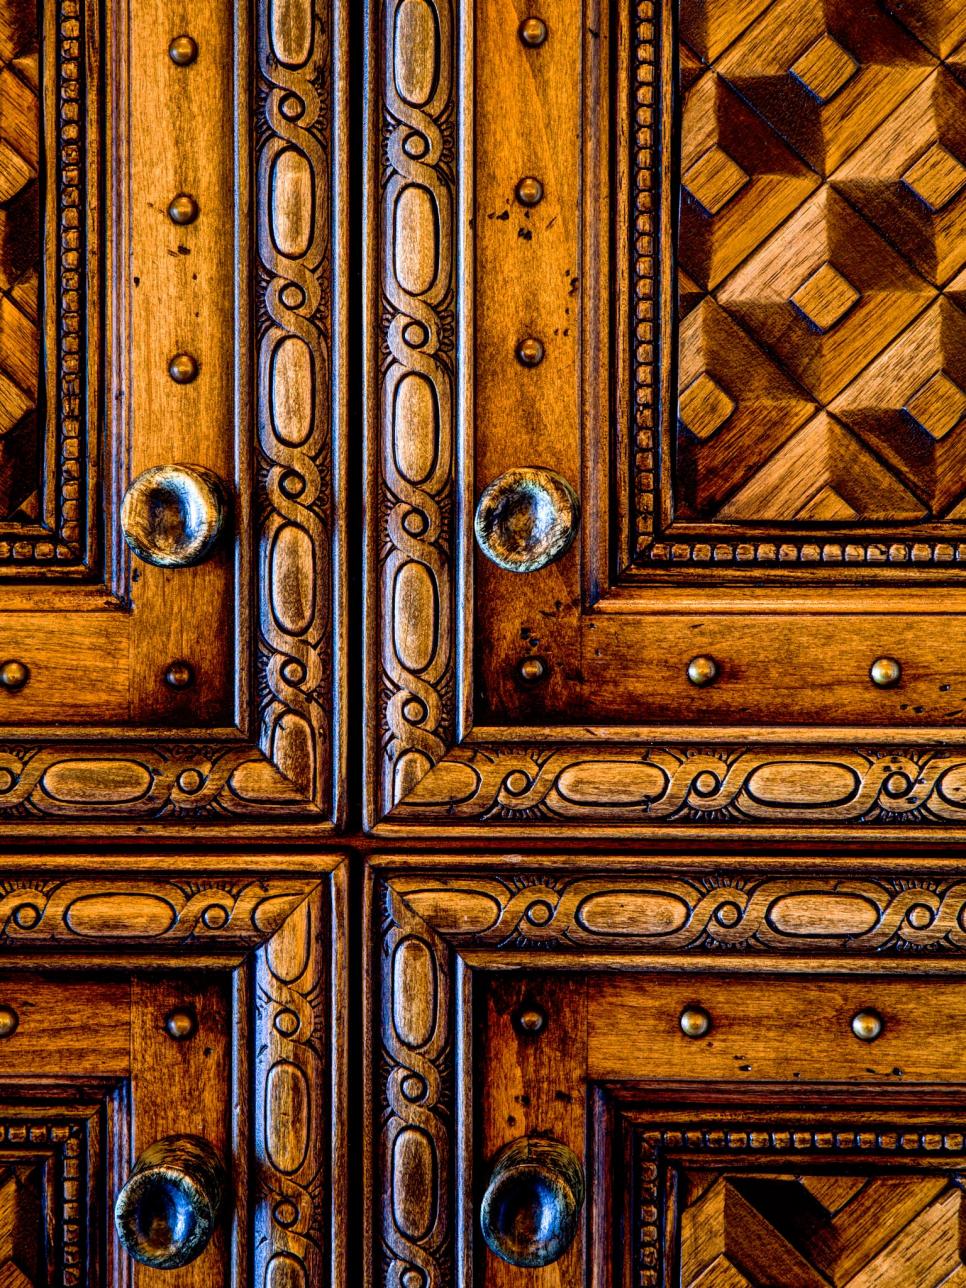 Carved Wood Bathroom Cabinets With a Mediterranean Style